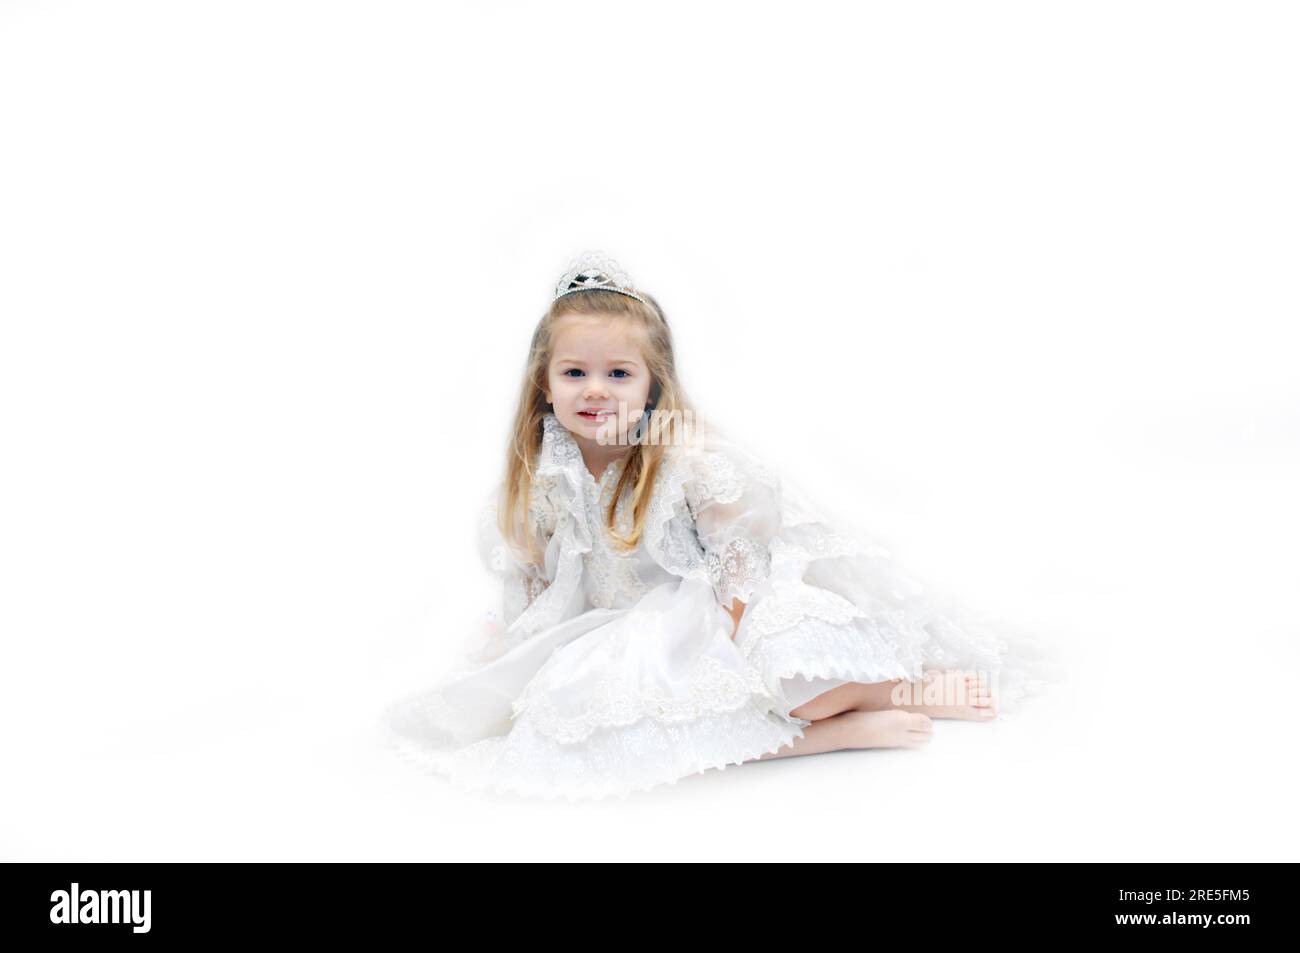 Angelic child dressed in all white lace and sparkling crown, sits in an all white room.  She is dreaming of being a bride one day. Stock Photo